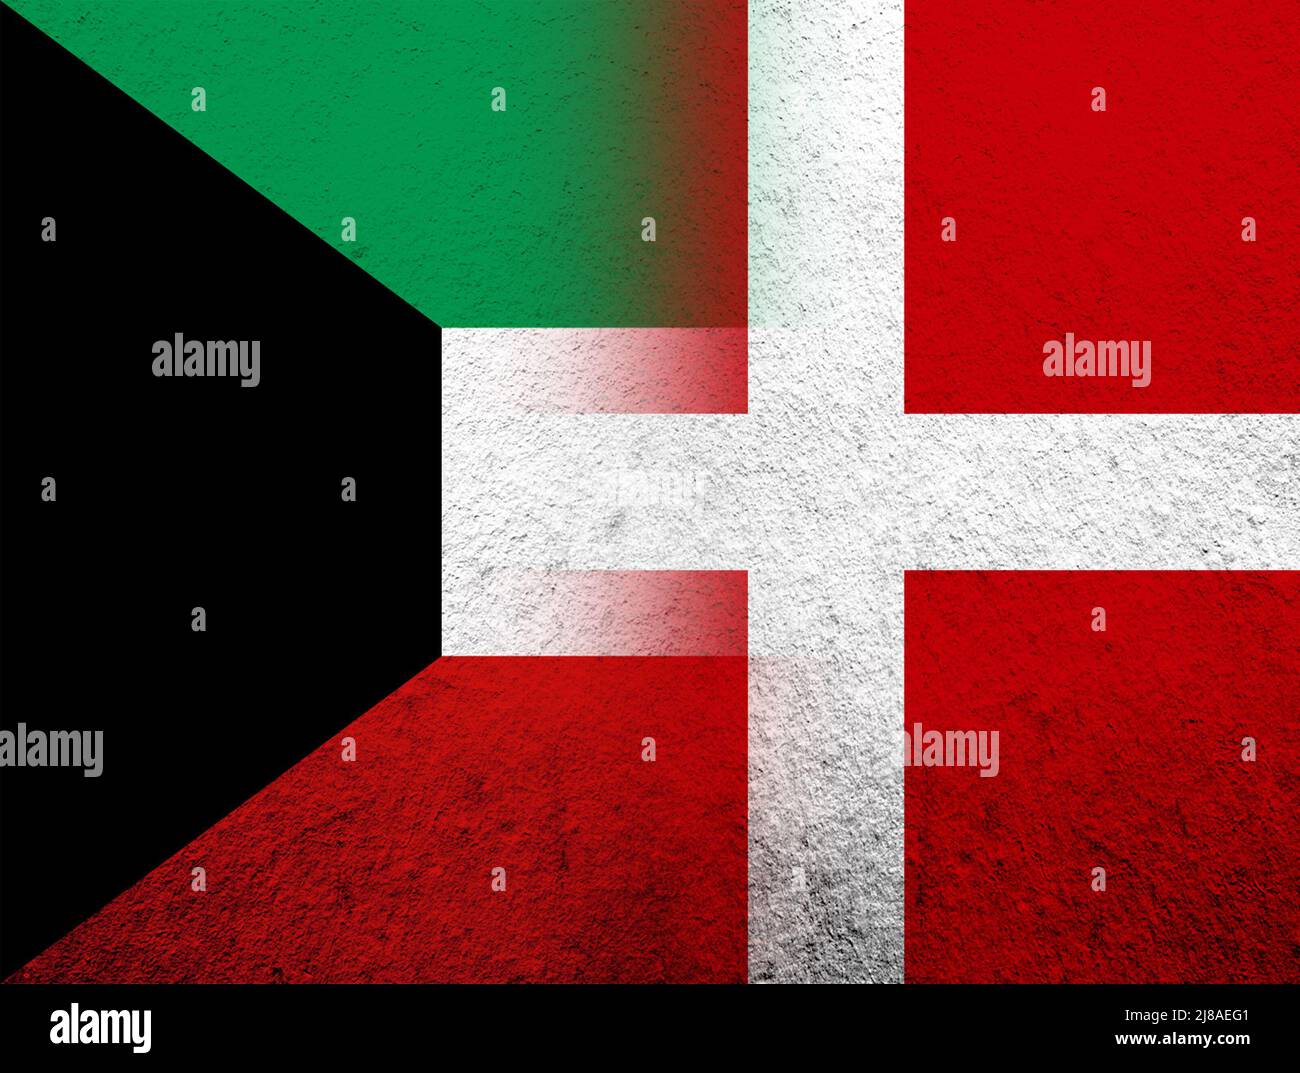 the Kingdom of Denmark National flag with The State of Kuwait National flag. Grunge Background Stock Photo